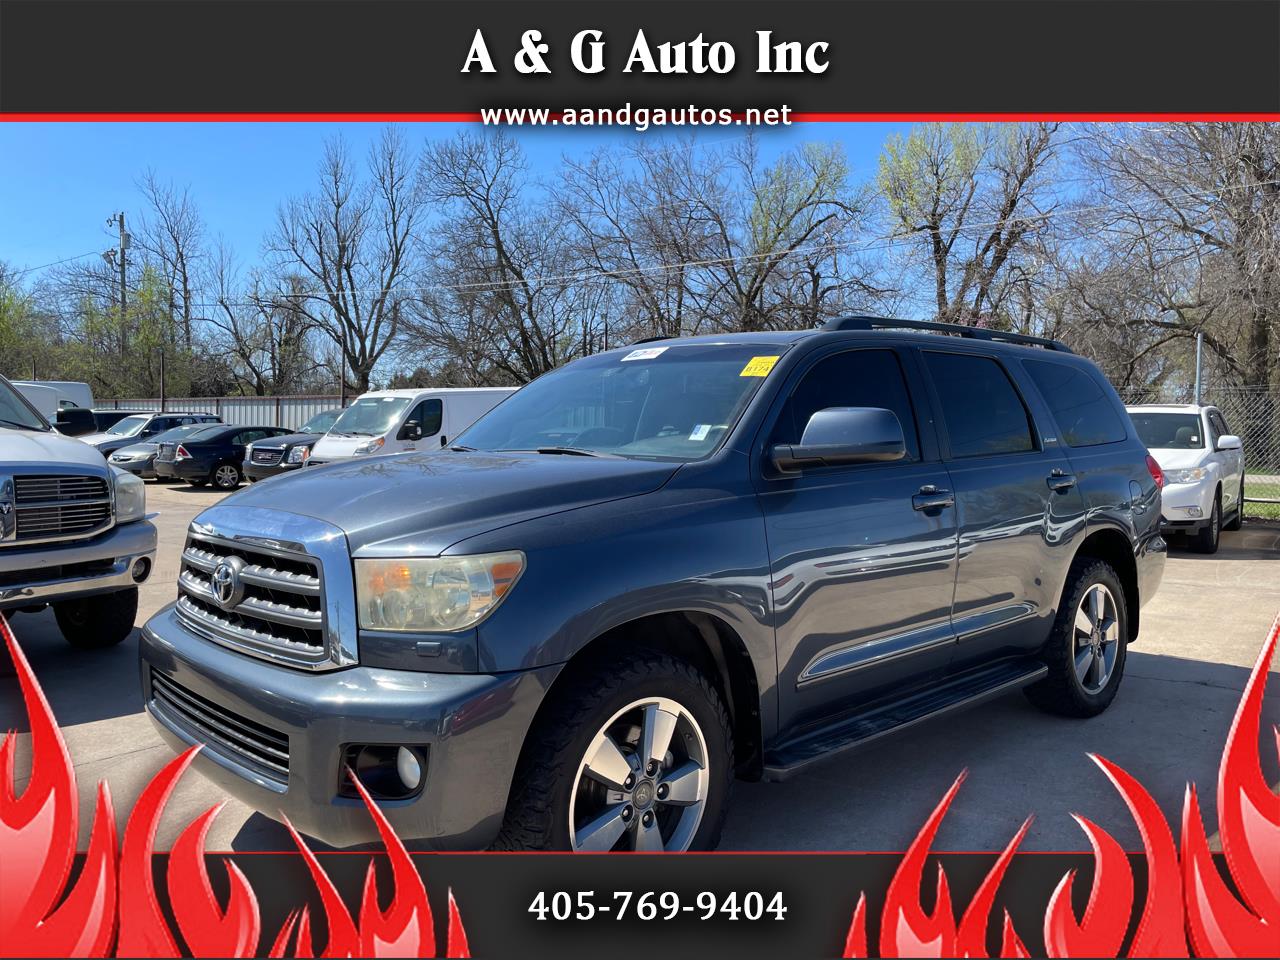 2008 Toyota Sequoia for sale in Oklahoma City OK 73141 by A & G Auto Inc